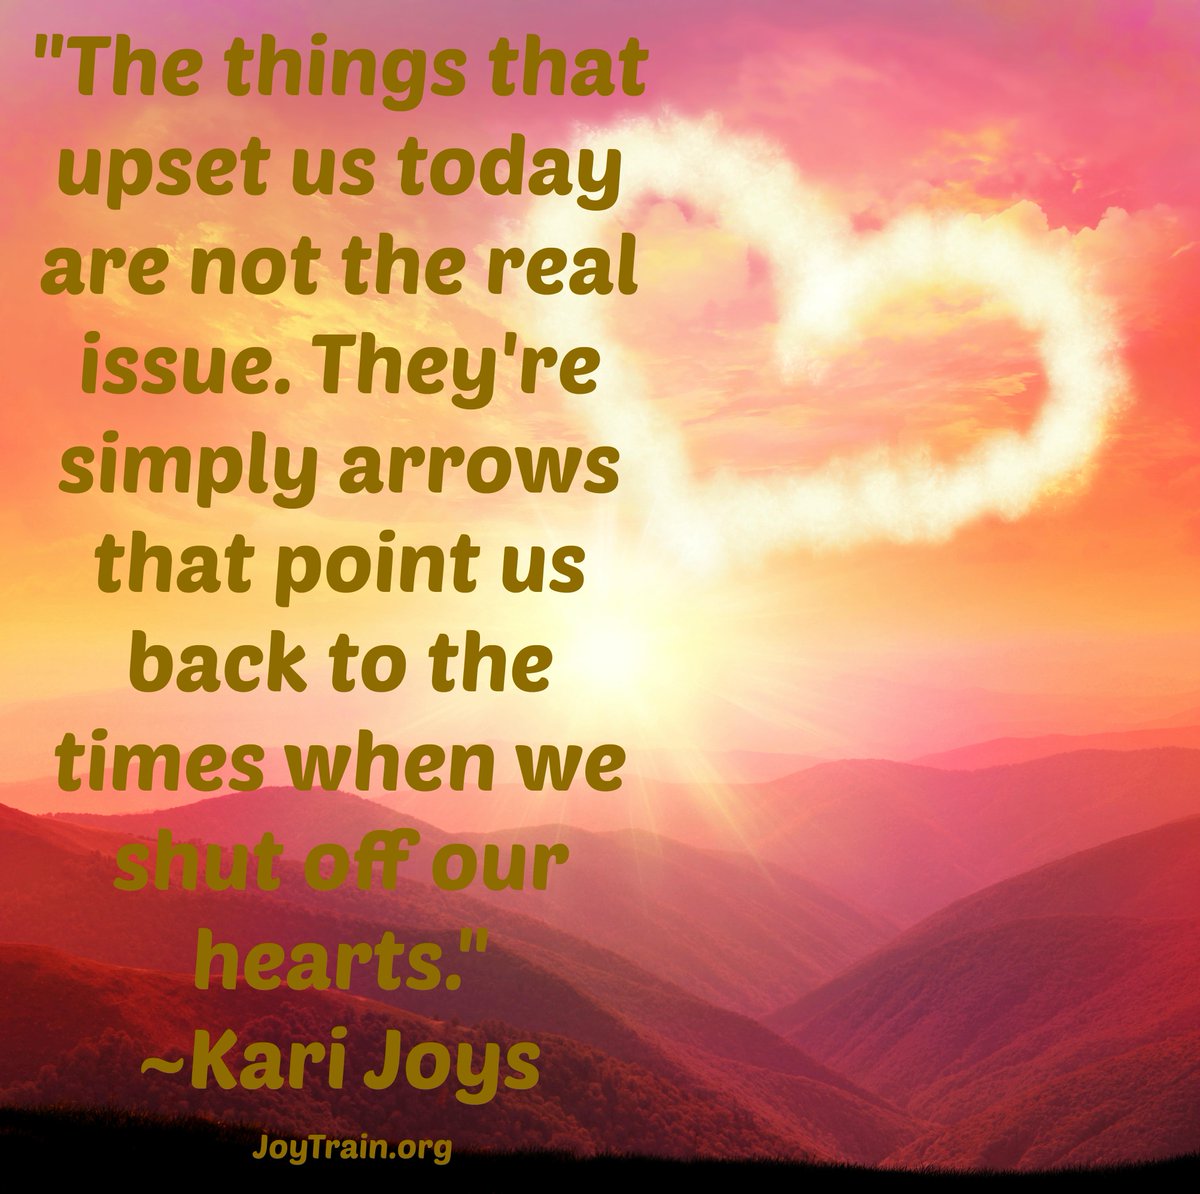 The things that upset us today are not the real issue... ~KJoys #JoyTrain #Growth #Anxiety #Joy